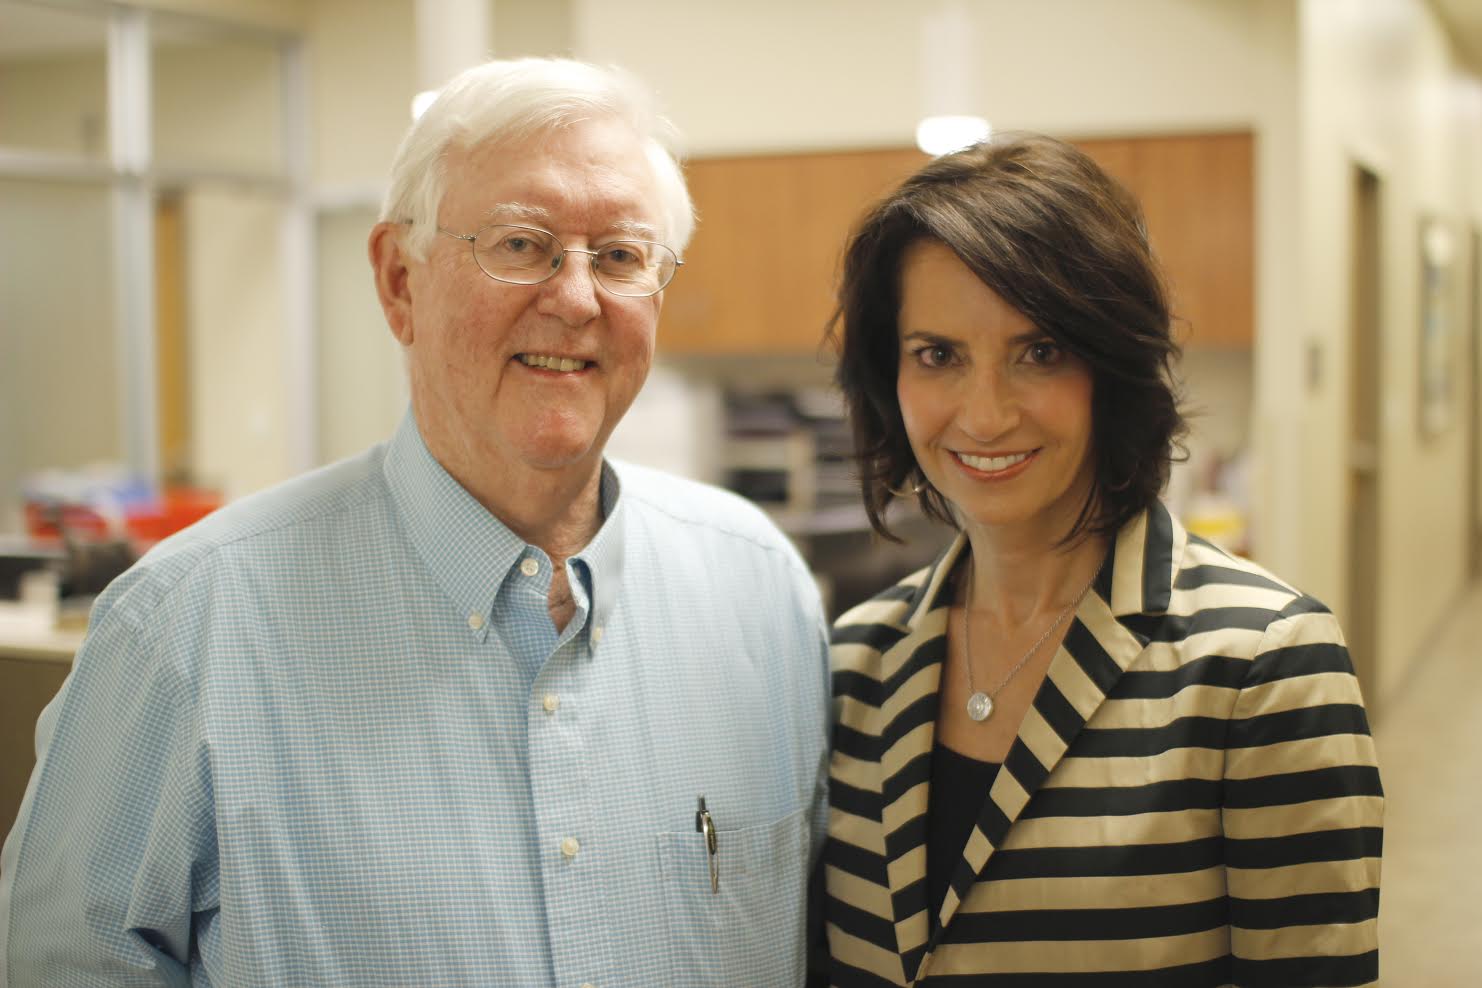 <em>Susan Salter, MD with prostate cancer patient Richard Hydinger who has benefitted from the SpaceOAR treatment offered at St. Vincent’s Birmingham. Susan Salter, MD has practiced at St. Vincent’s Birmingham for more than two decades. She is a member of St. Luke’s Episcopal Church, on the Mountain Brook City Schools Foundation Board of Directors and a member of the Junior League of Birmingham.</em>